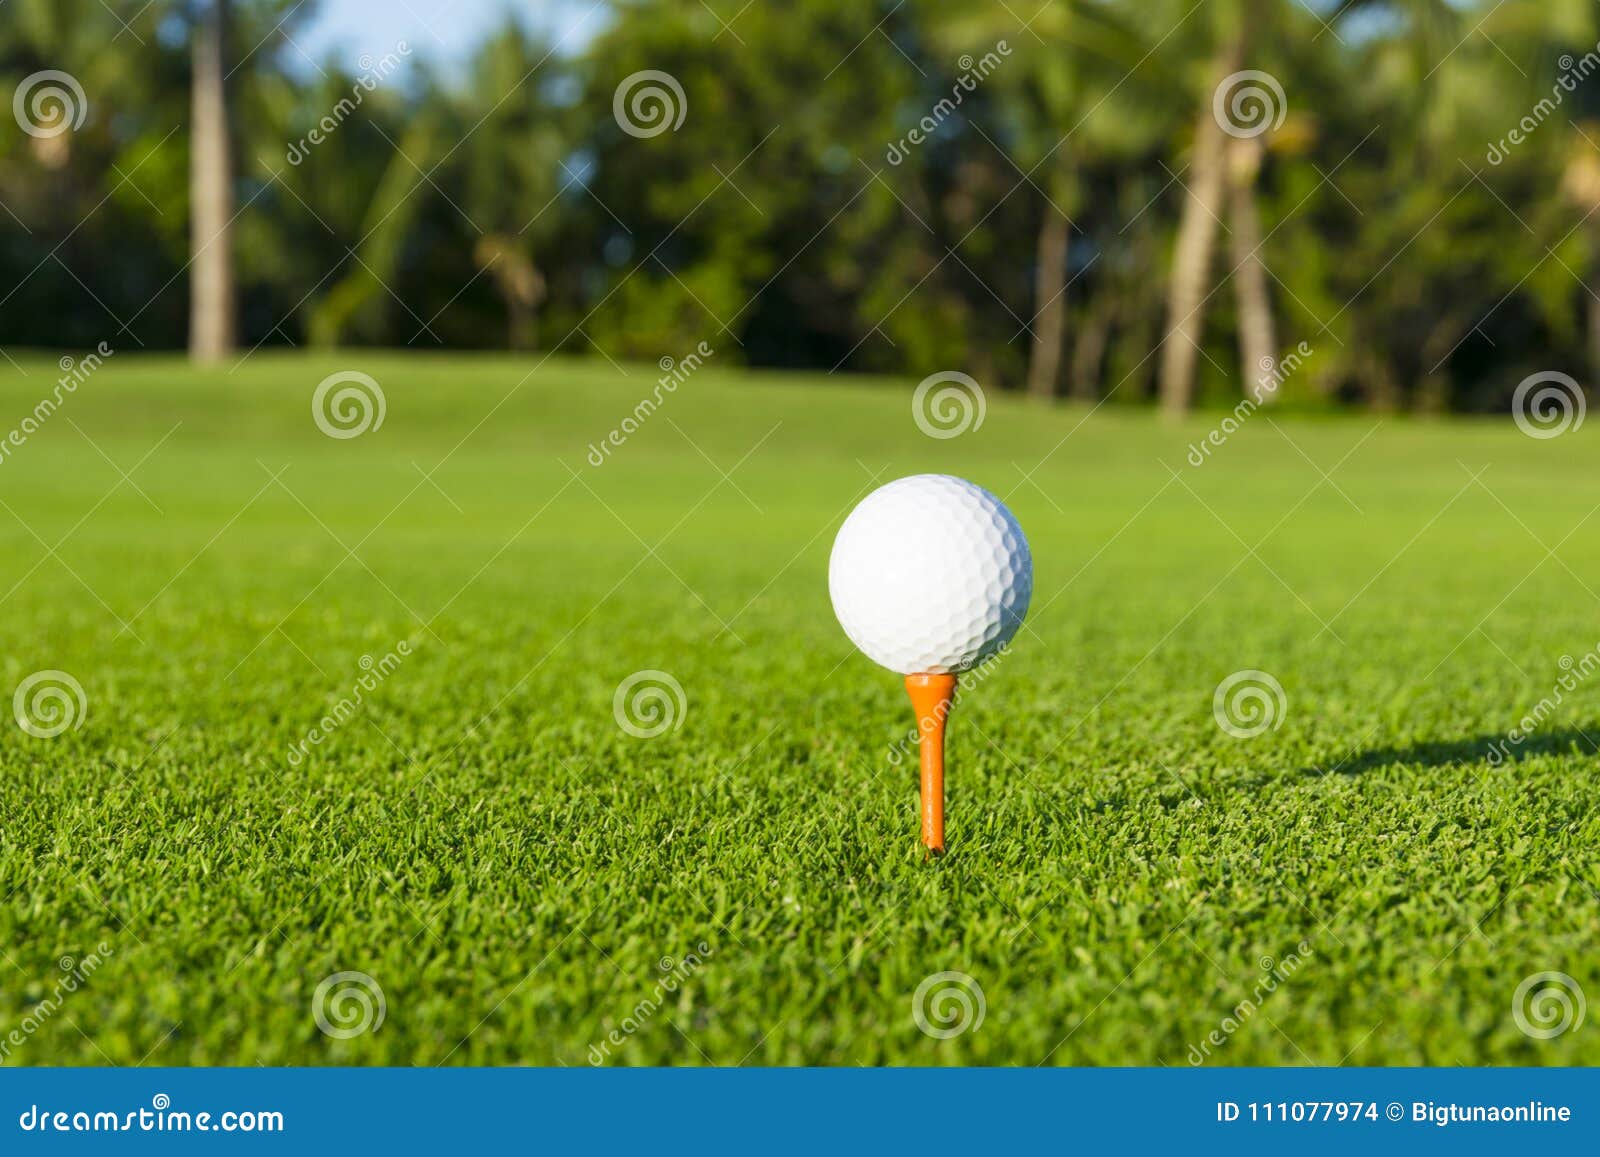 golf ball on tee on golf course over a blurred green field.